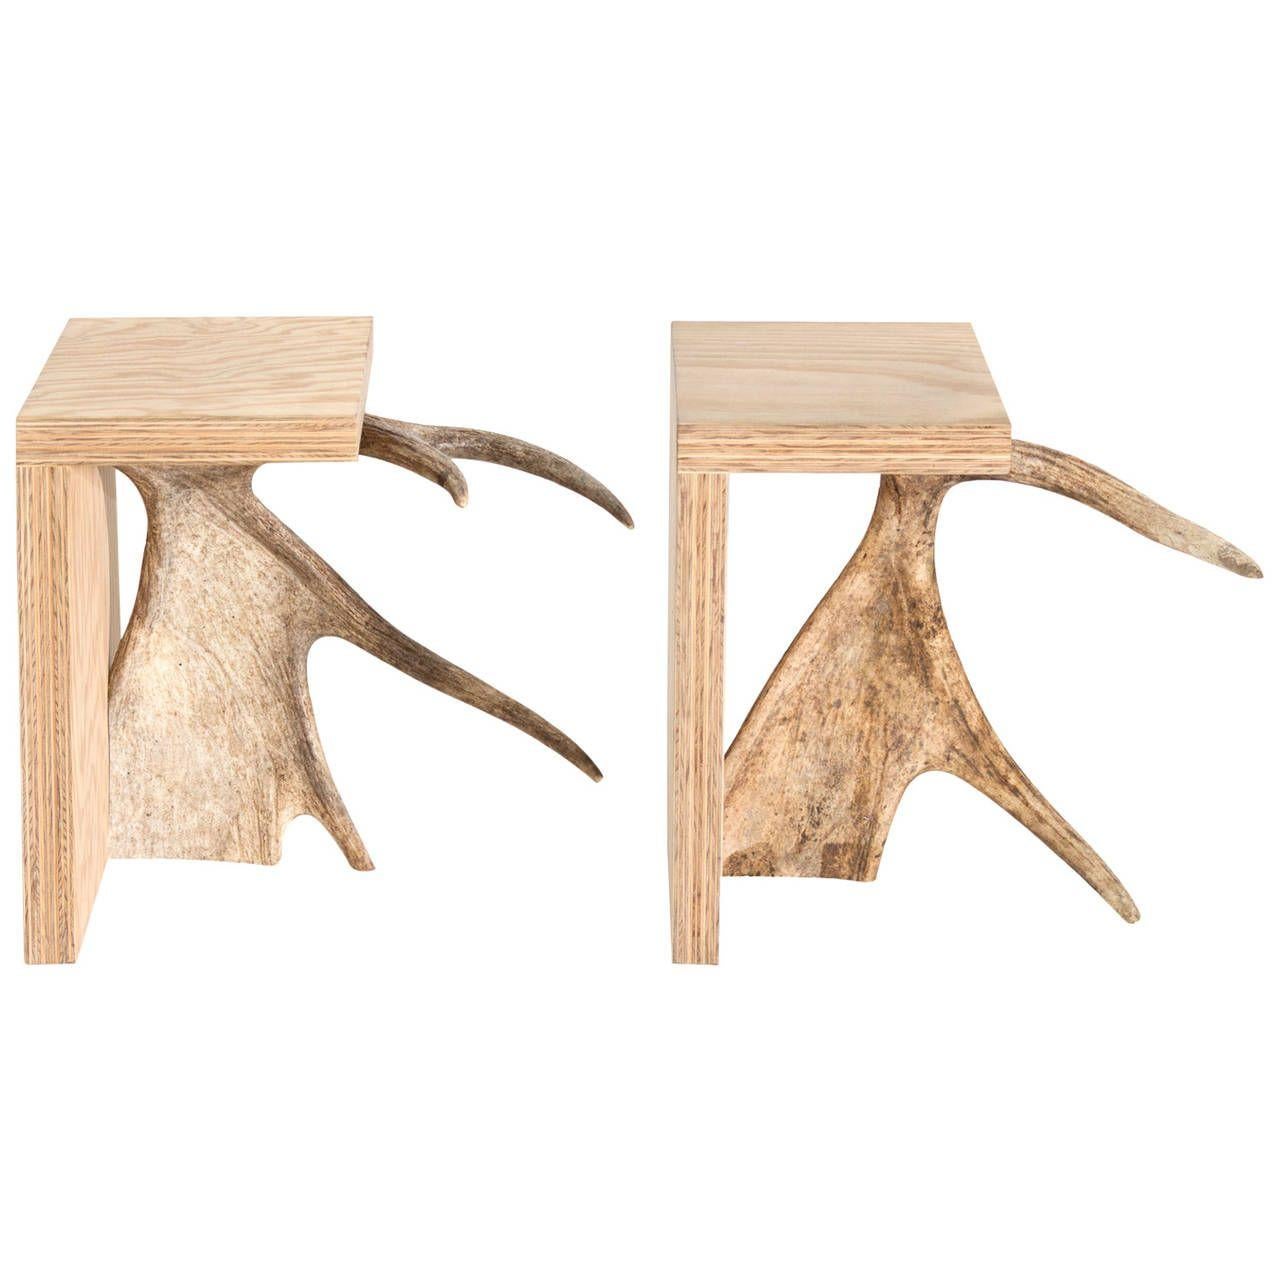 Stag T Stool / Side Table by Rick Owens
Dimensions: L 55 x W 30 x H 44 cm
Materials: Plywood, antler moose
Weight: 7.3 kg

Each piece is unique and may differ as the Antler Moose is unique.
Available in black or natural plywood finish.

Rick